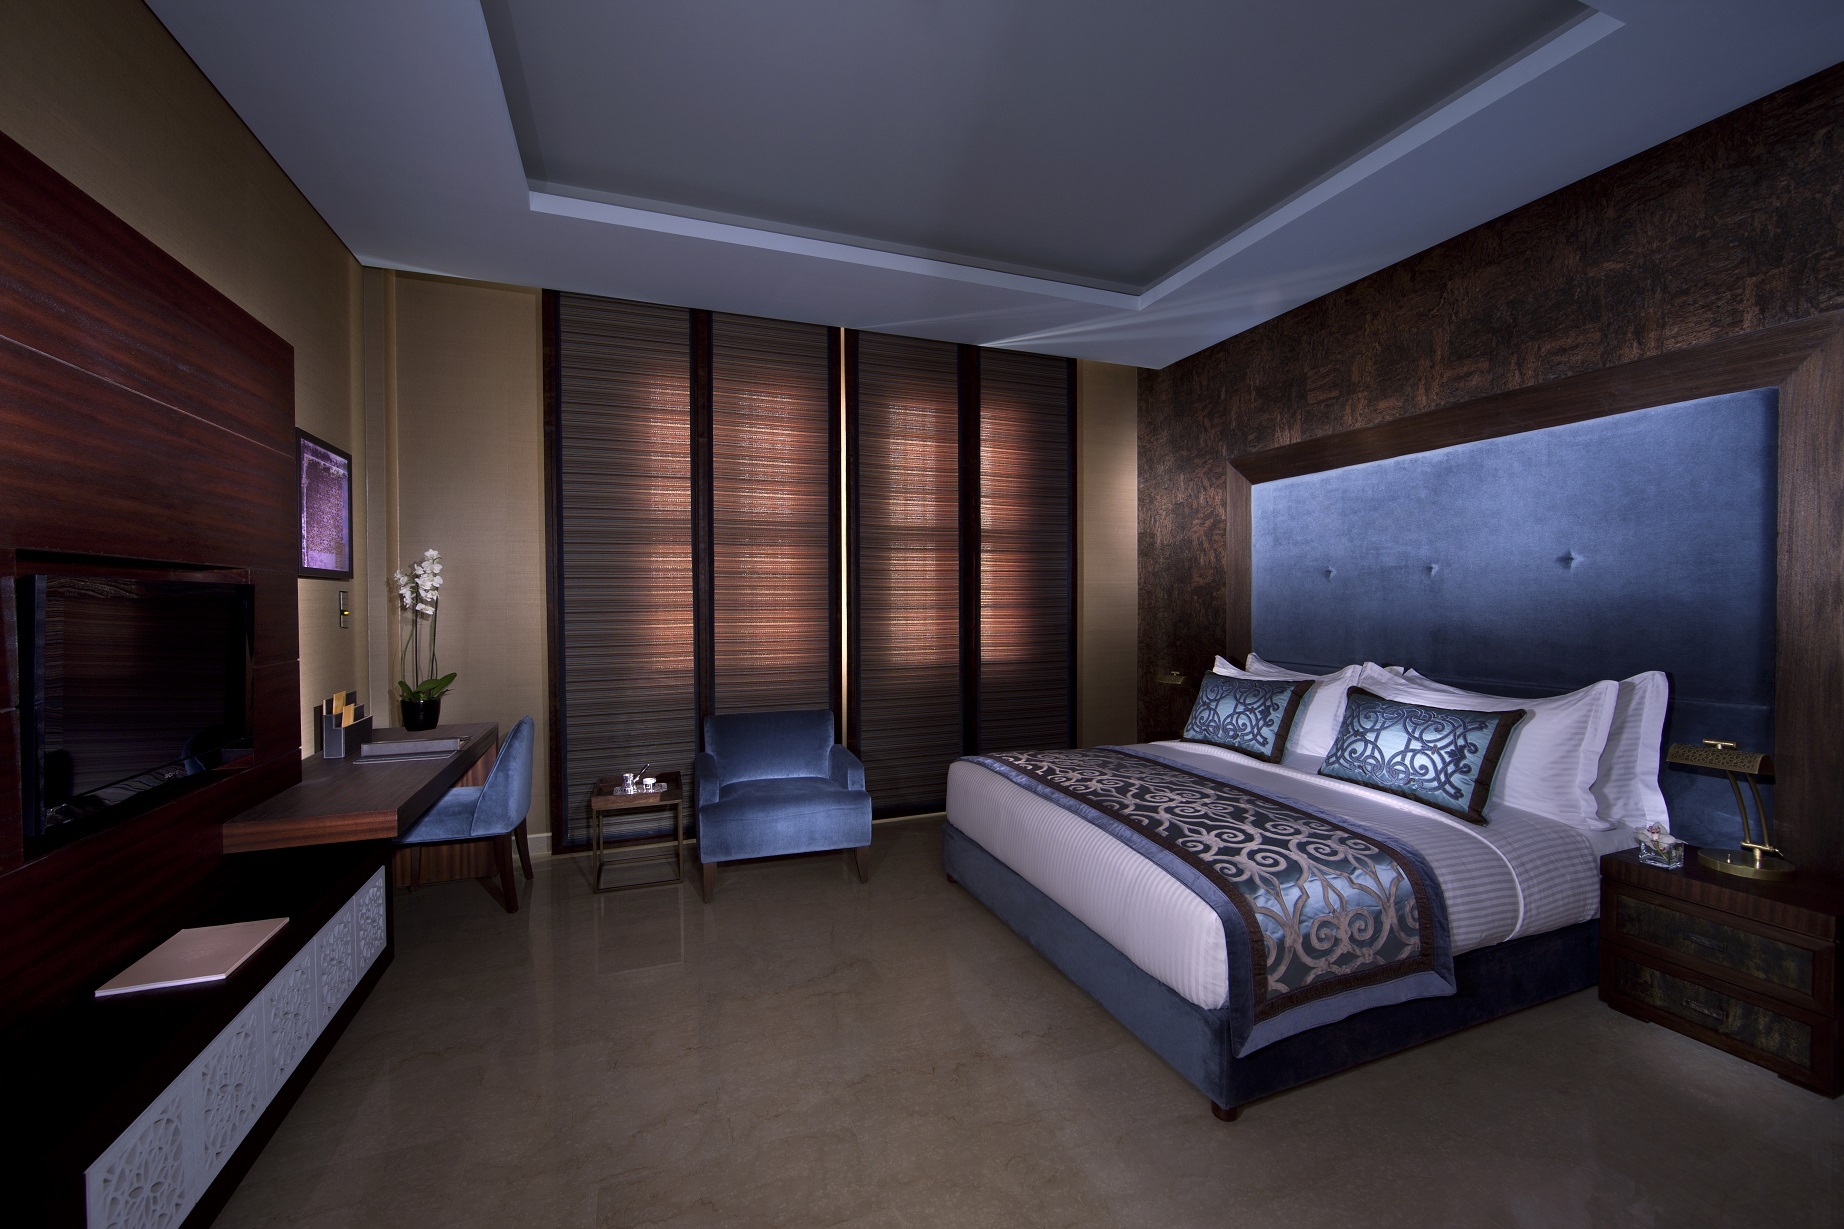 <strong>Souq Waqif Boutique Hotels and Al Najada Hotel introduce exclusive Eid special offers</strong>